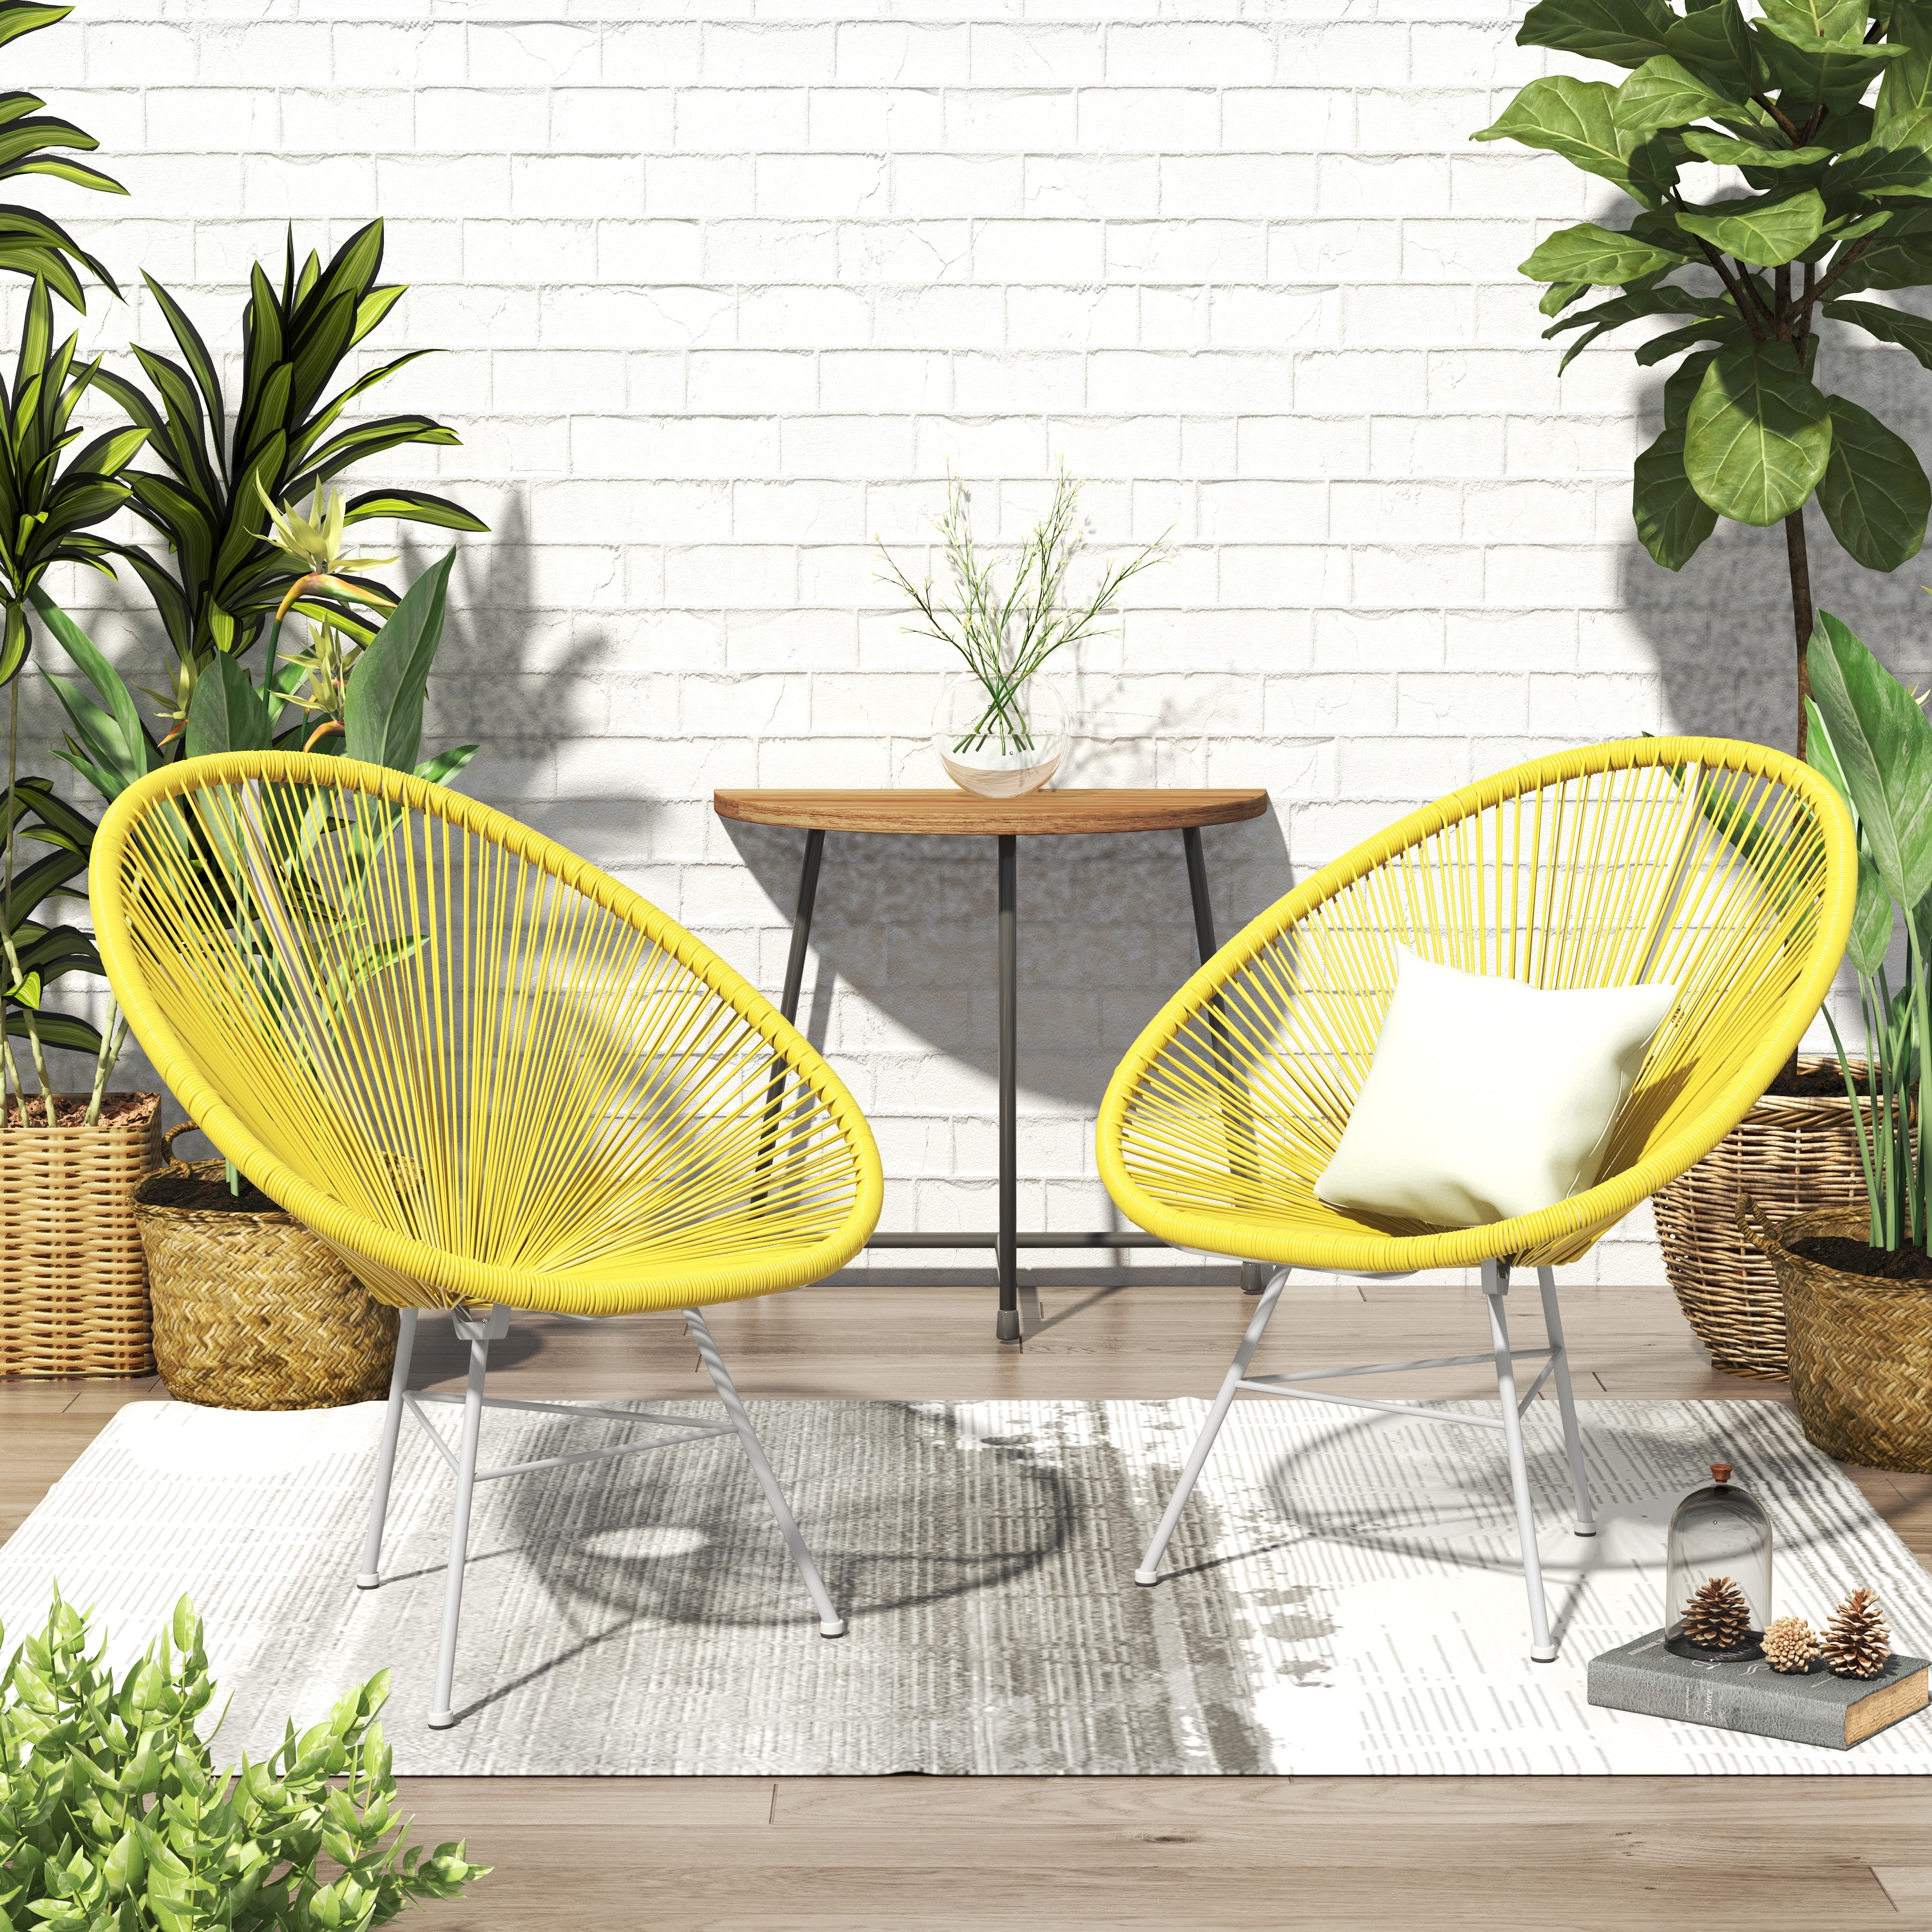 Red Meubles House S1-ACA-R-R Silvia Hier Modern Style Acapulco Wicker Outdoor Chair with Rocker Legs Single 